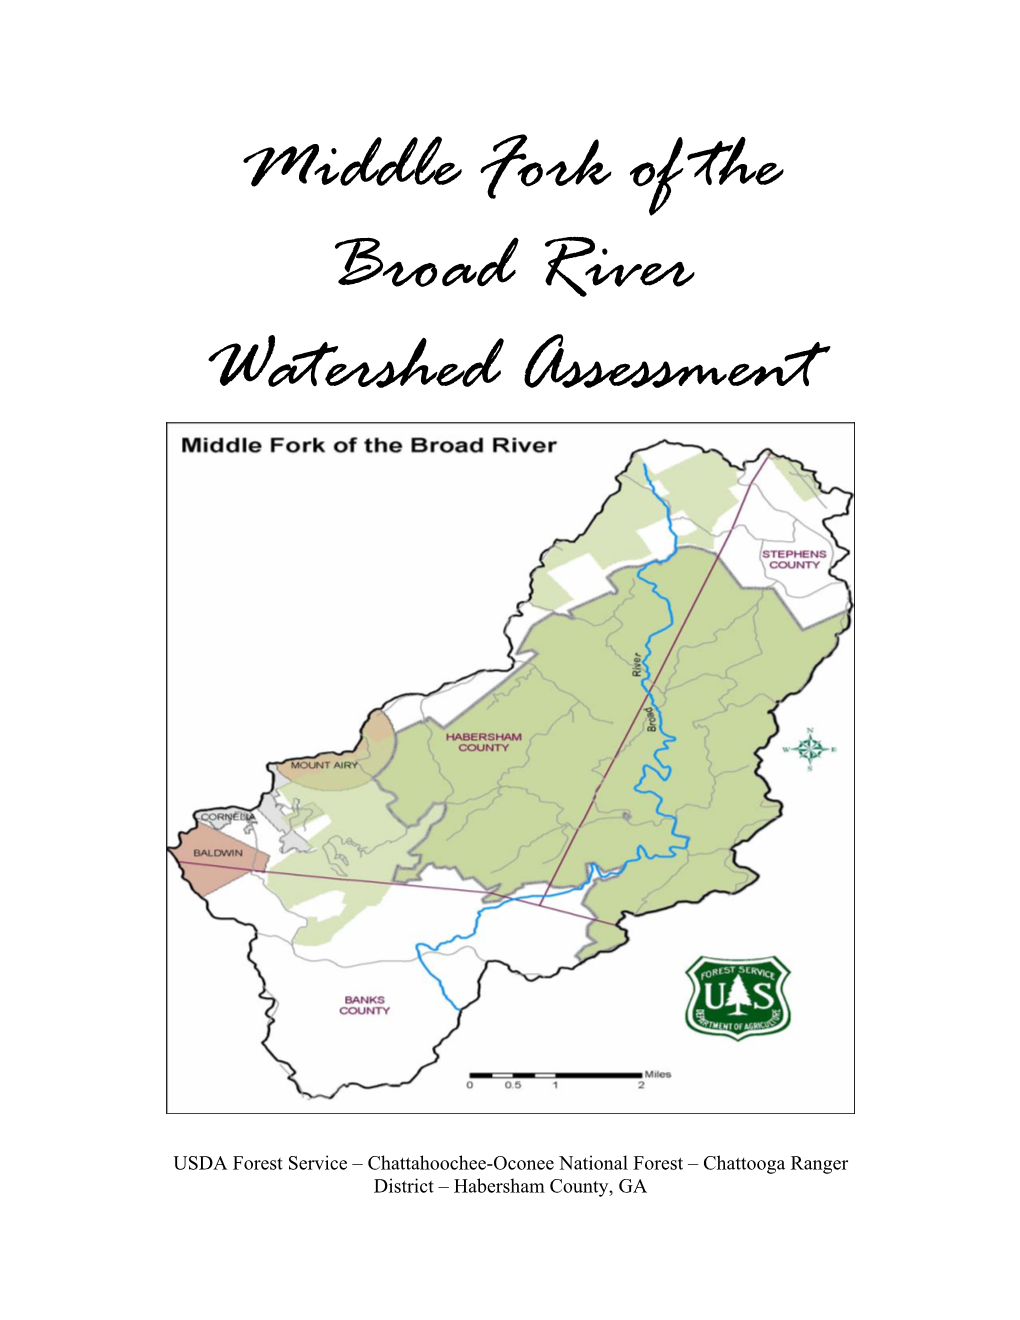 Middle Fork of the Broad River Watershed Assessment